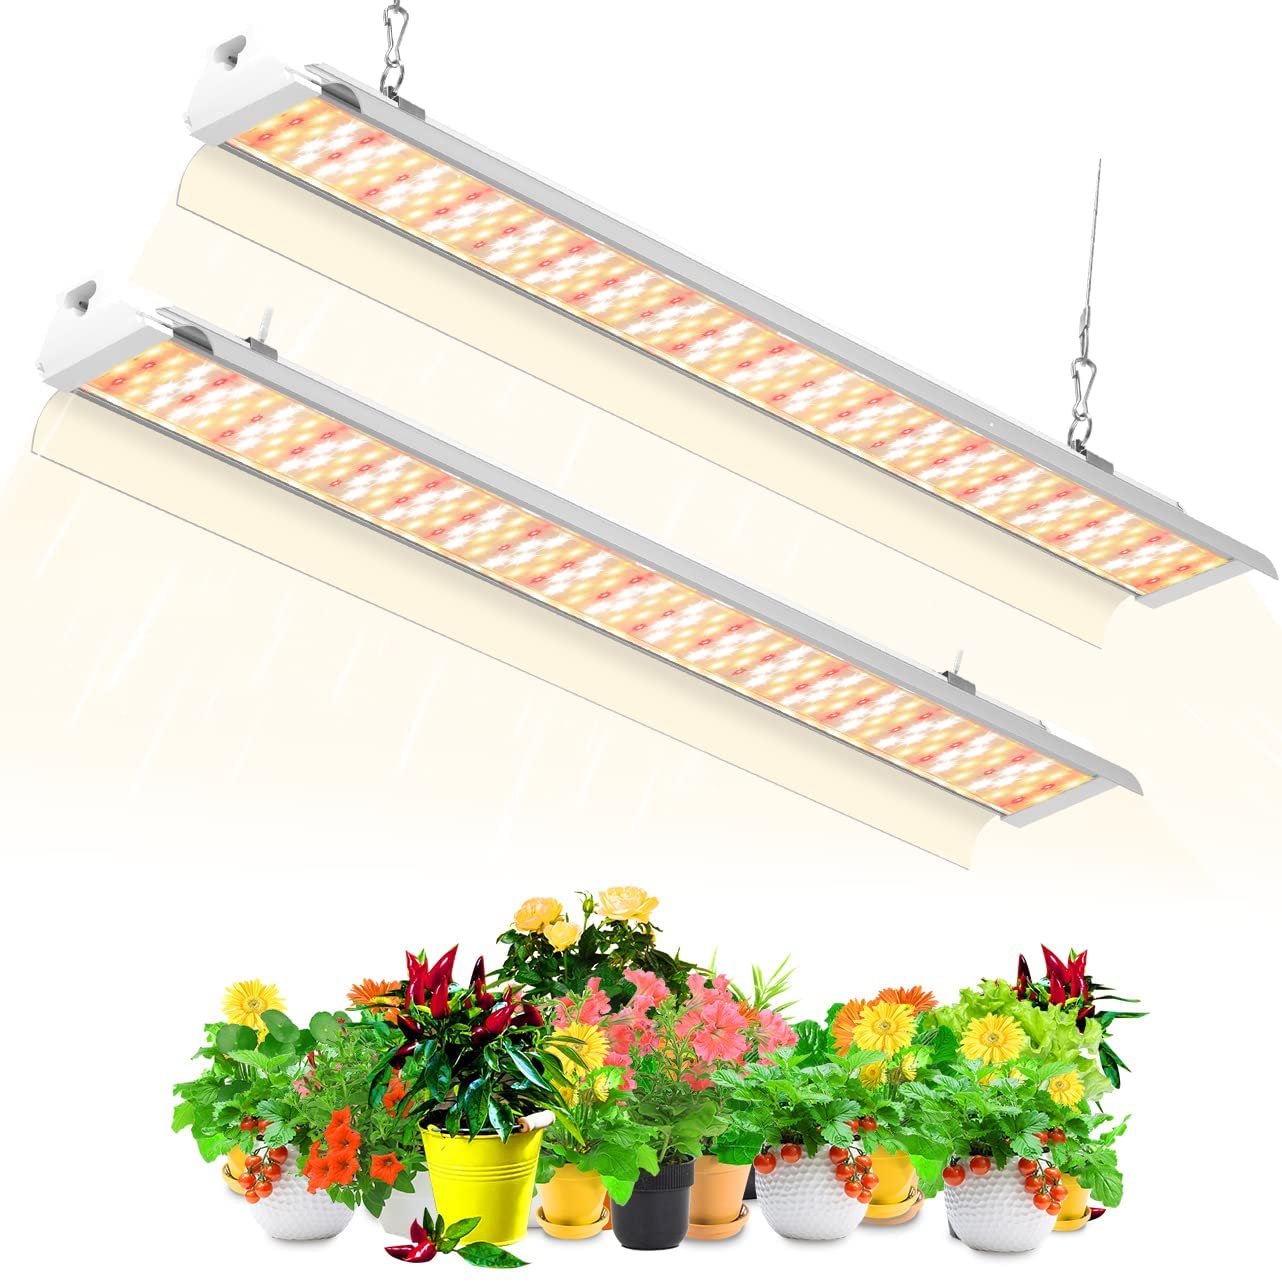 Growing Light Fixture Pink SZHLUX LED Grow Light 4ft 280W 4×70W High Output Grow Light Strip Linkable Design with Reflector-4 Pack Full Spectrum Plant Light for Indoor Plants 